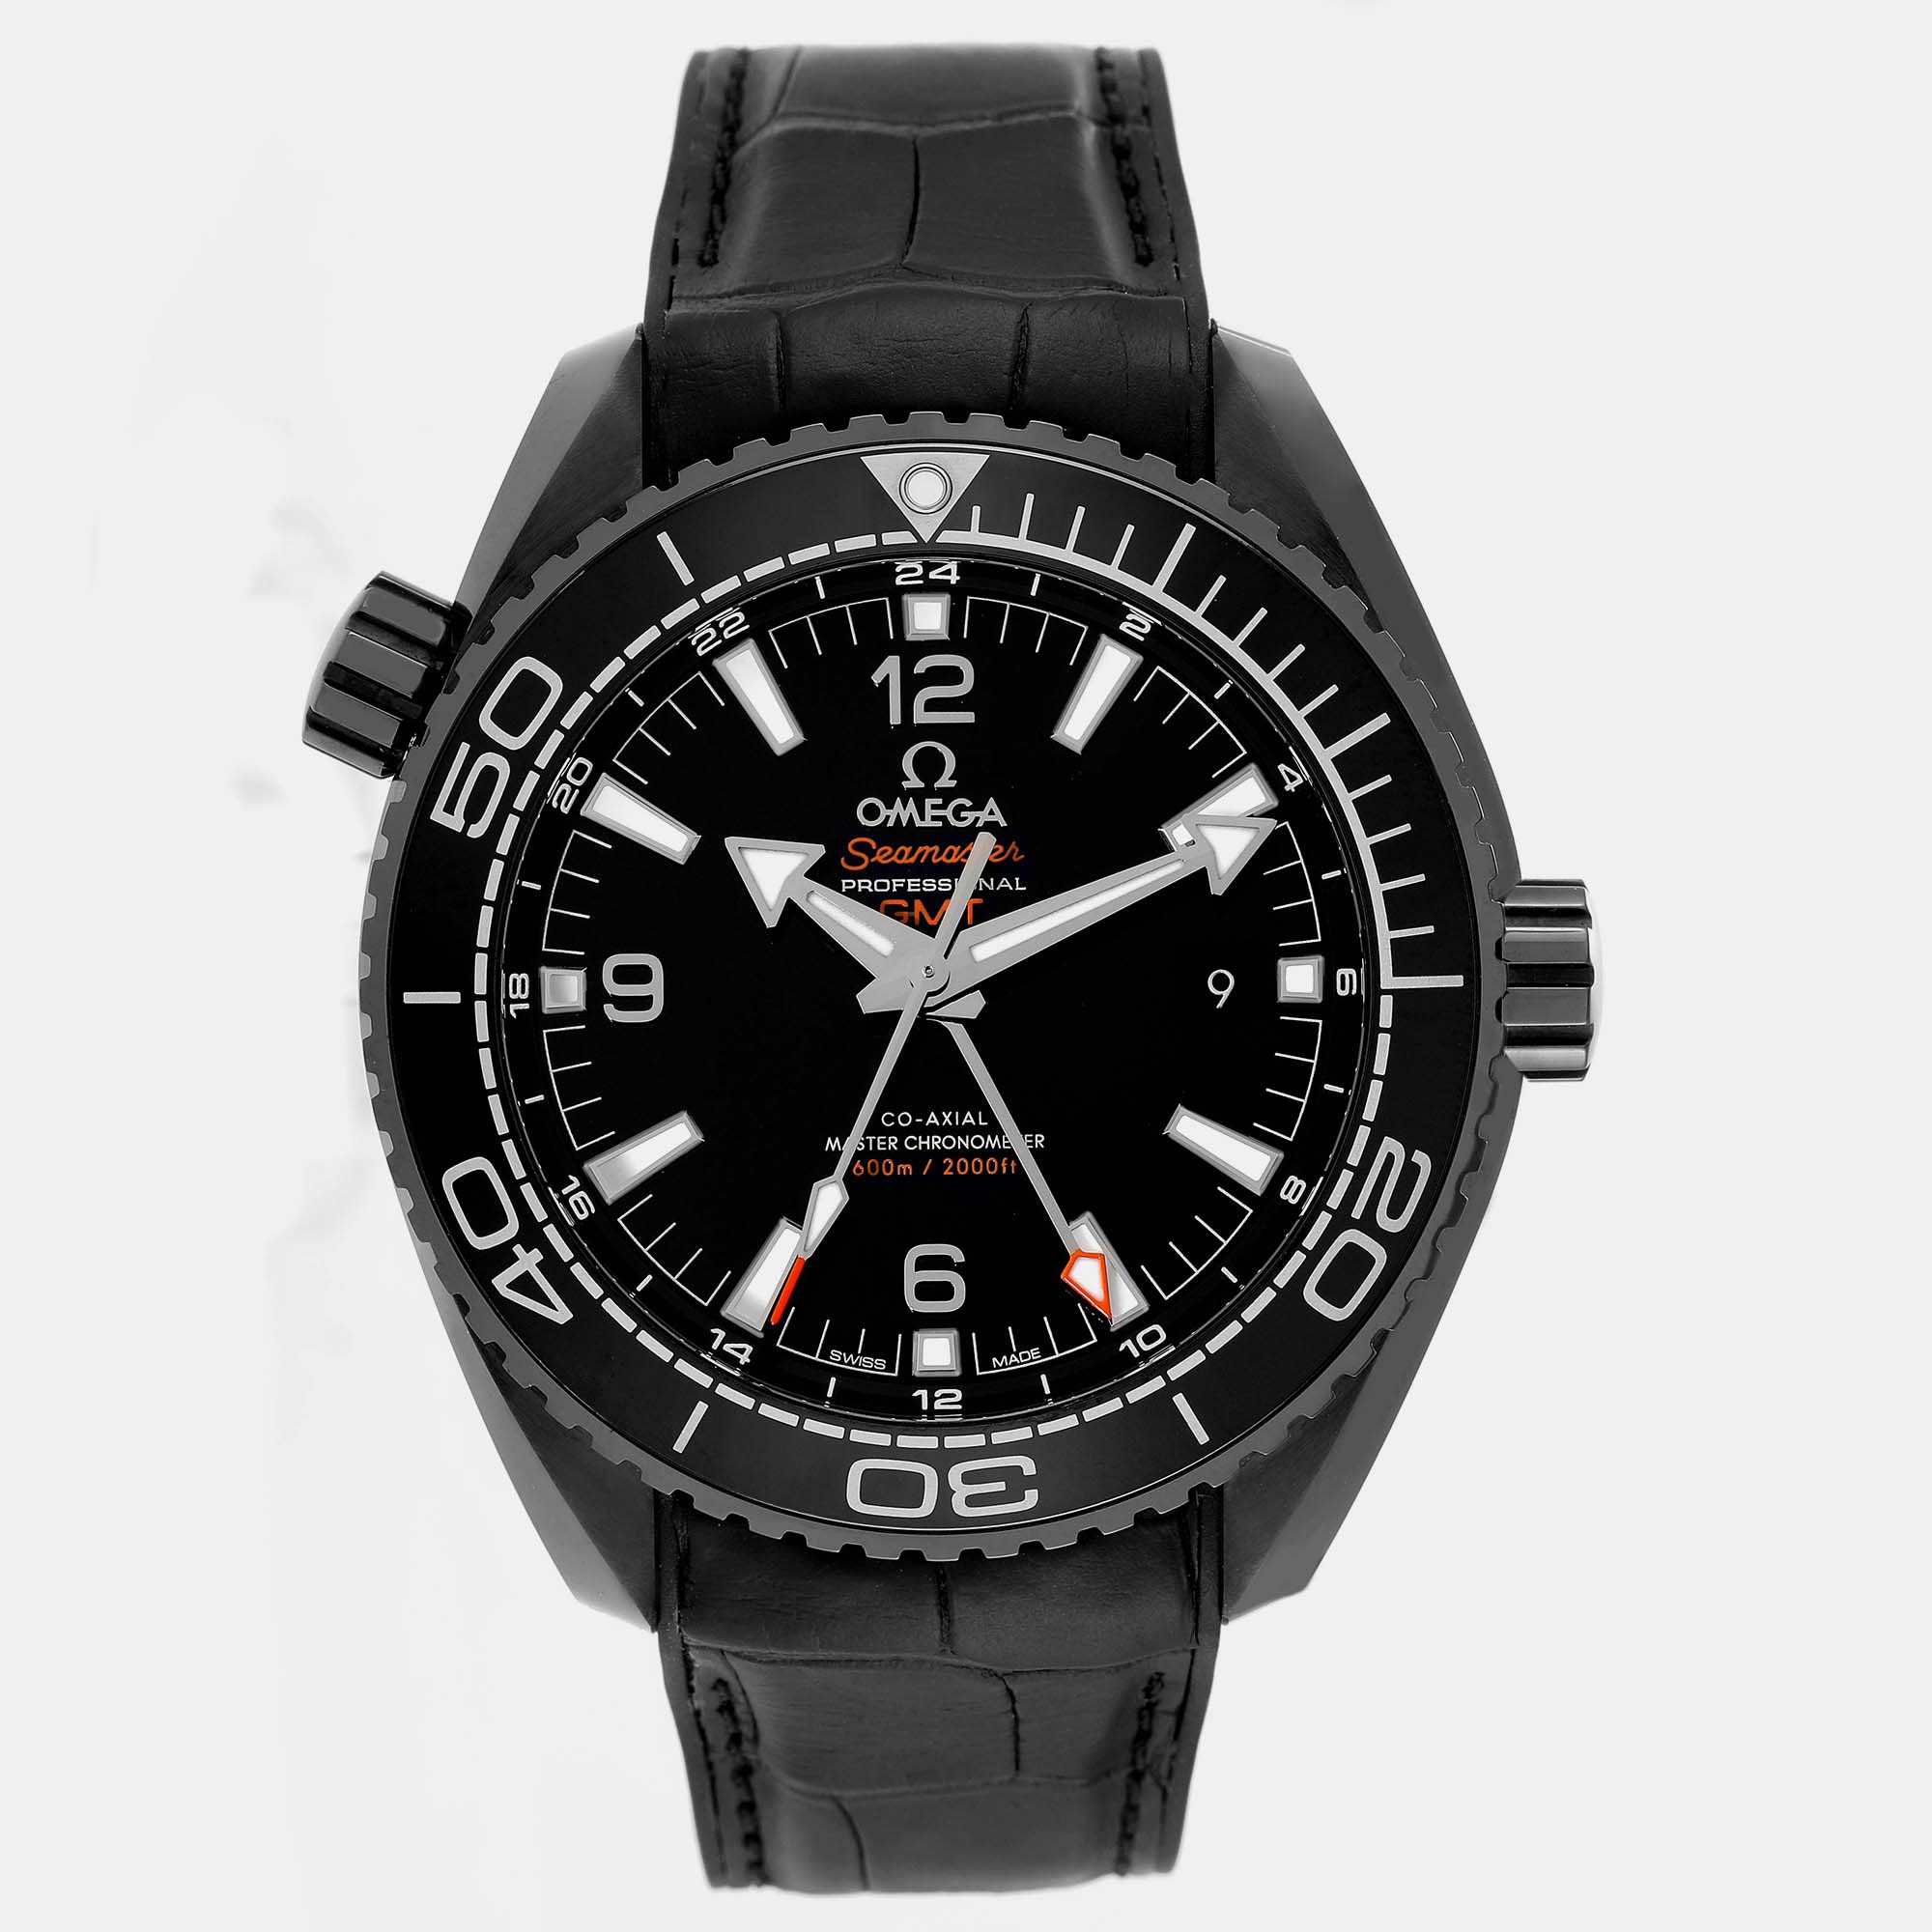 Pre-owned Omega Black Ceramic Seamaster Planet Ocean 215.92.46.22.01.001 Automatic Men's Wristwatch 45.5 Mm